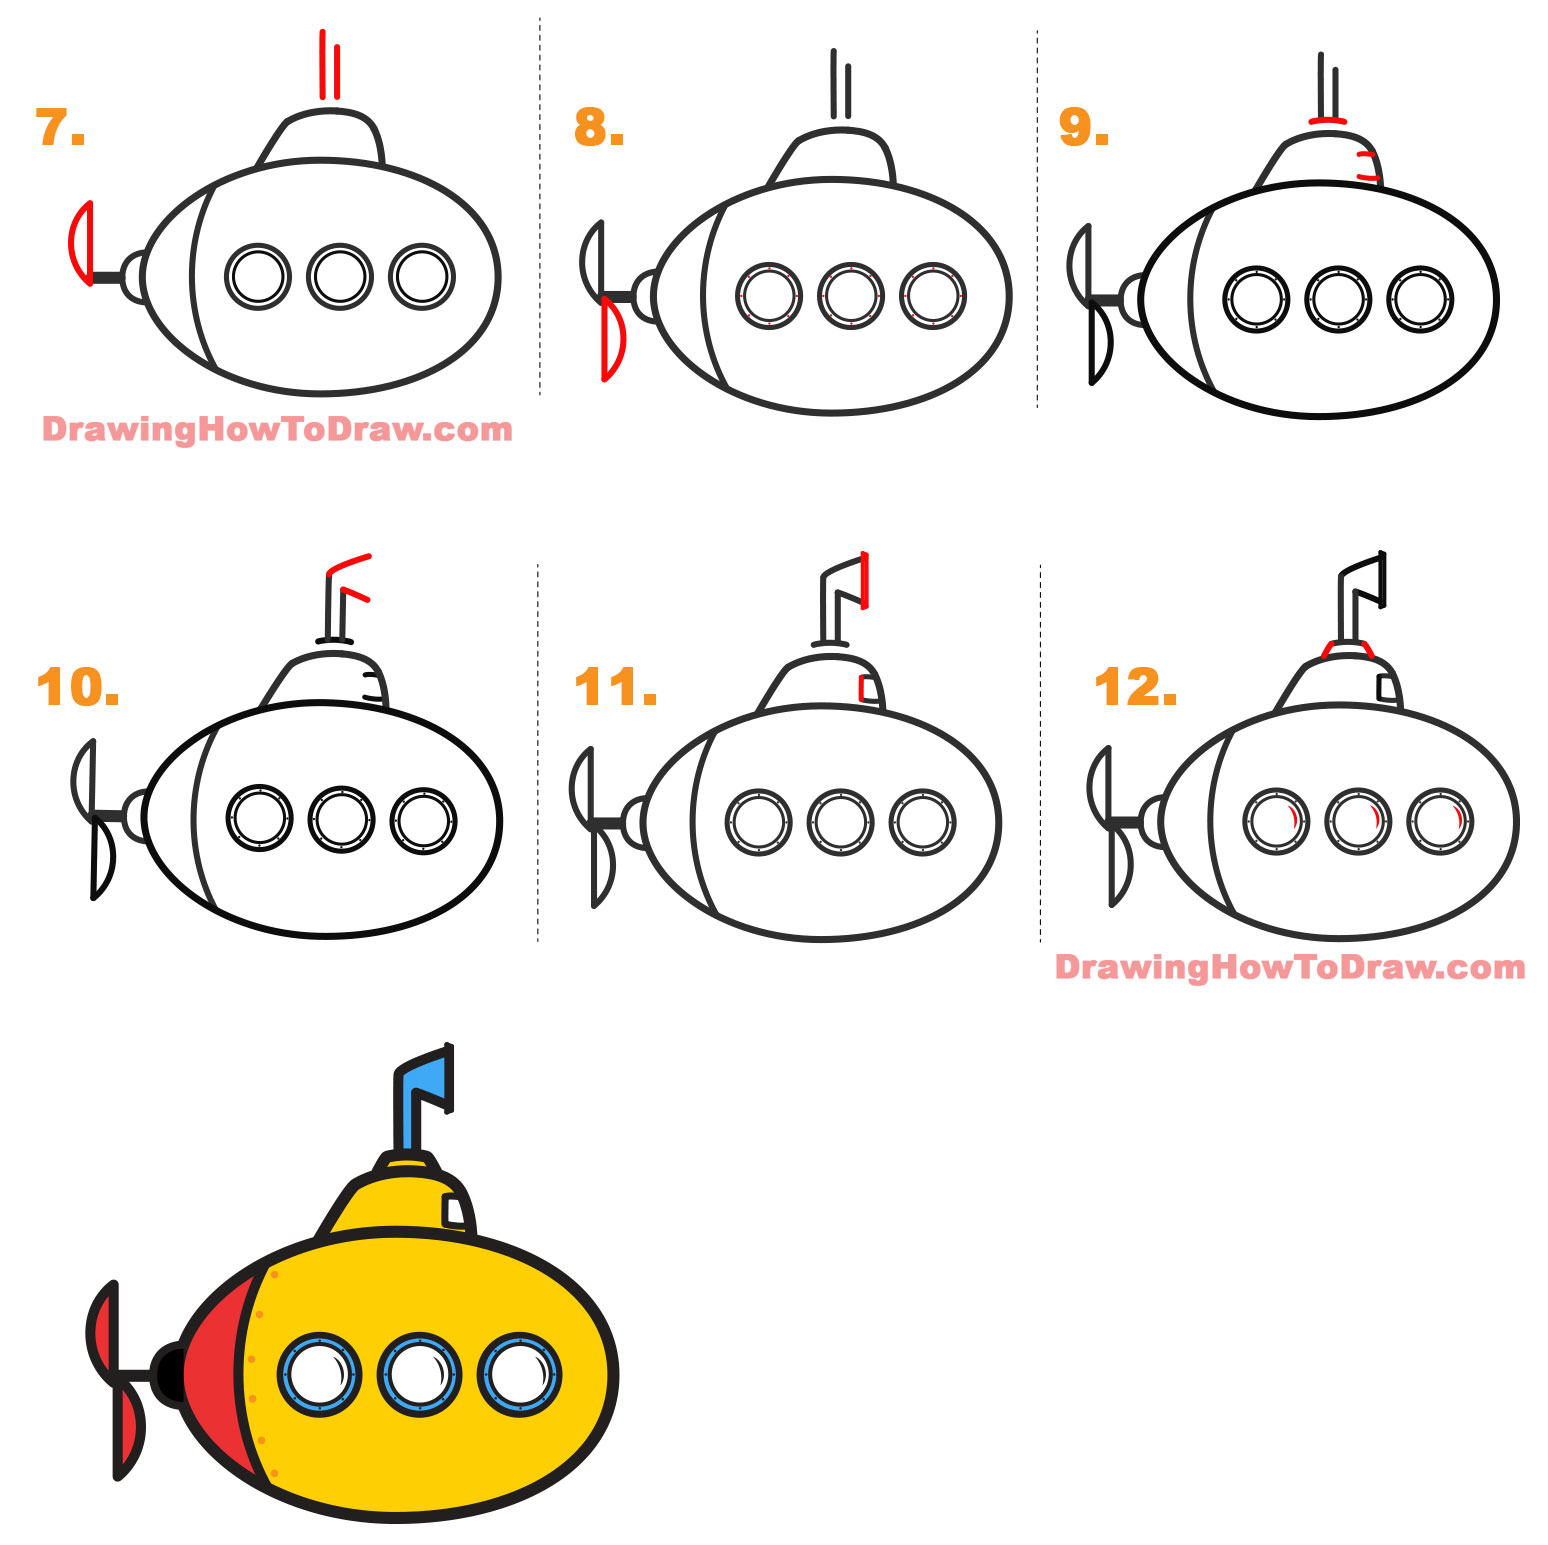 Learn How to Draw a Cartoon Submarine Easy Step-by-Step Drawing Tutorial for Kids